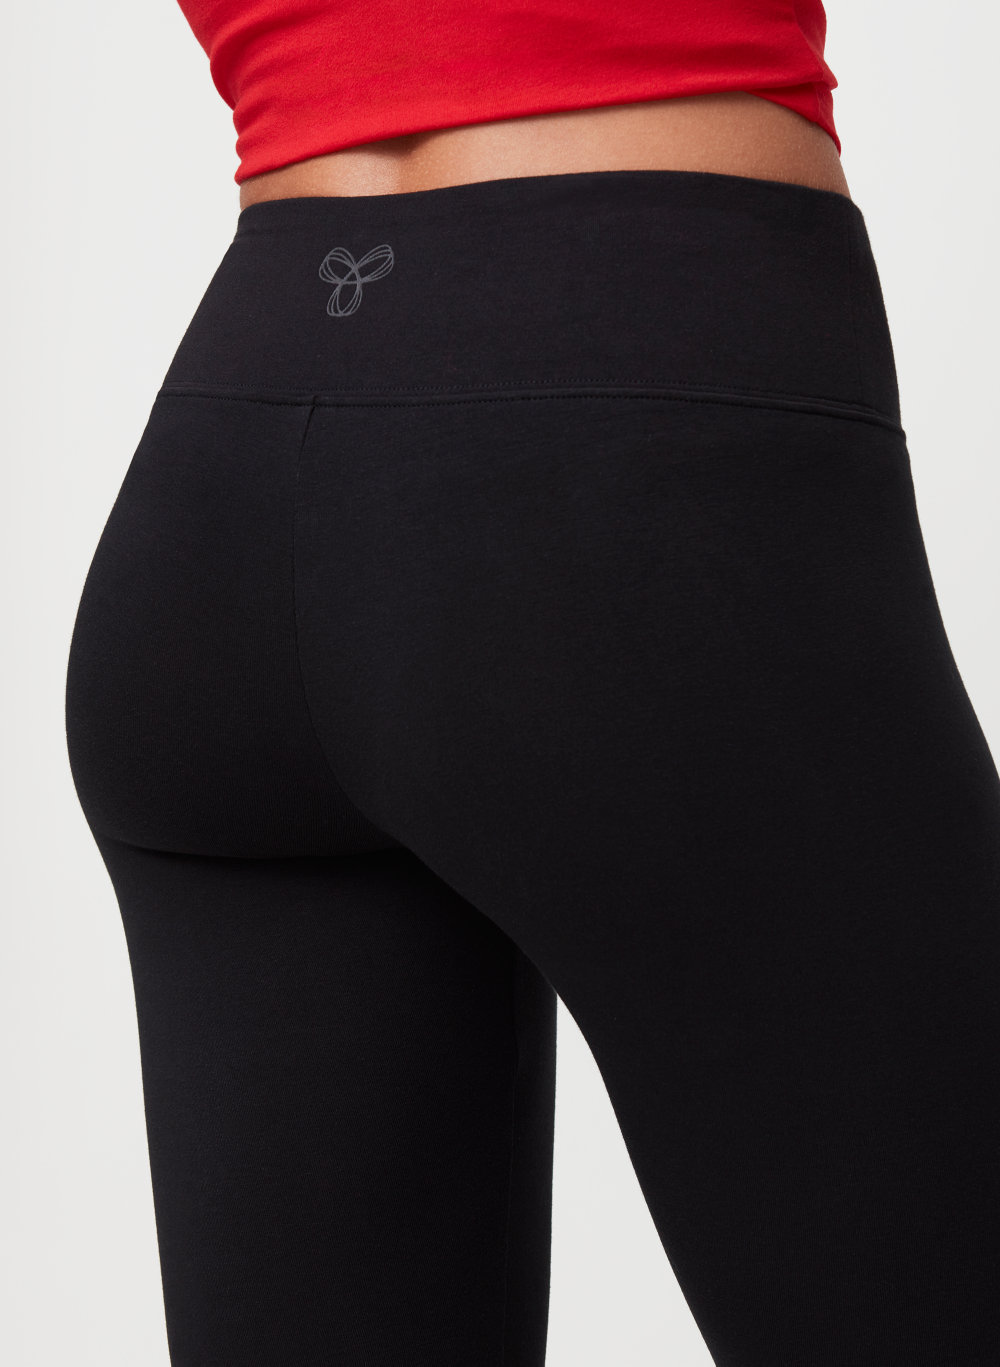 Aritzia TnaBUTTER Activewear Review (Controversial Opinion